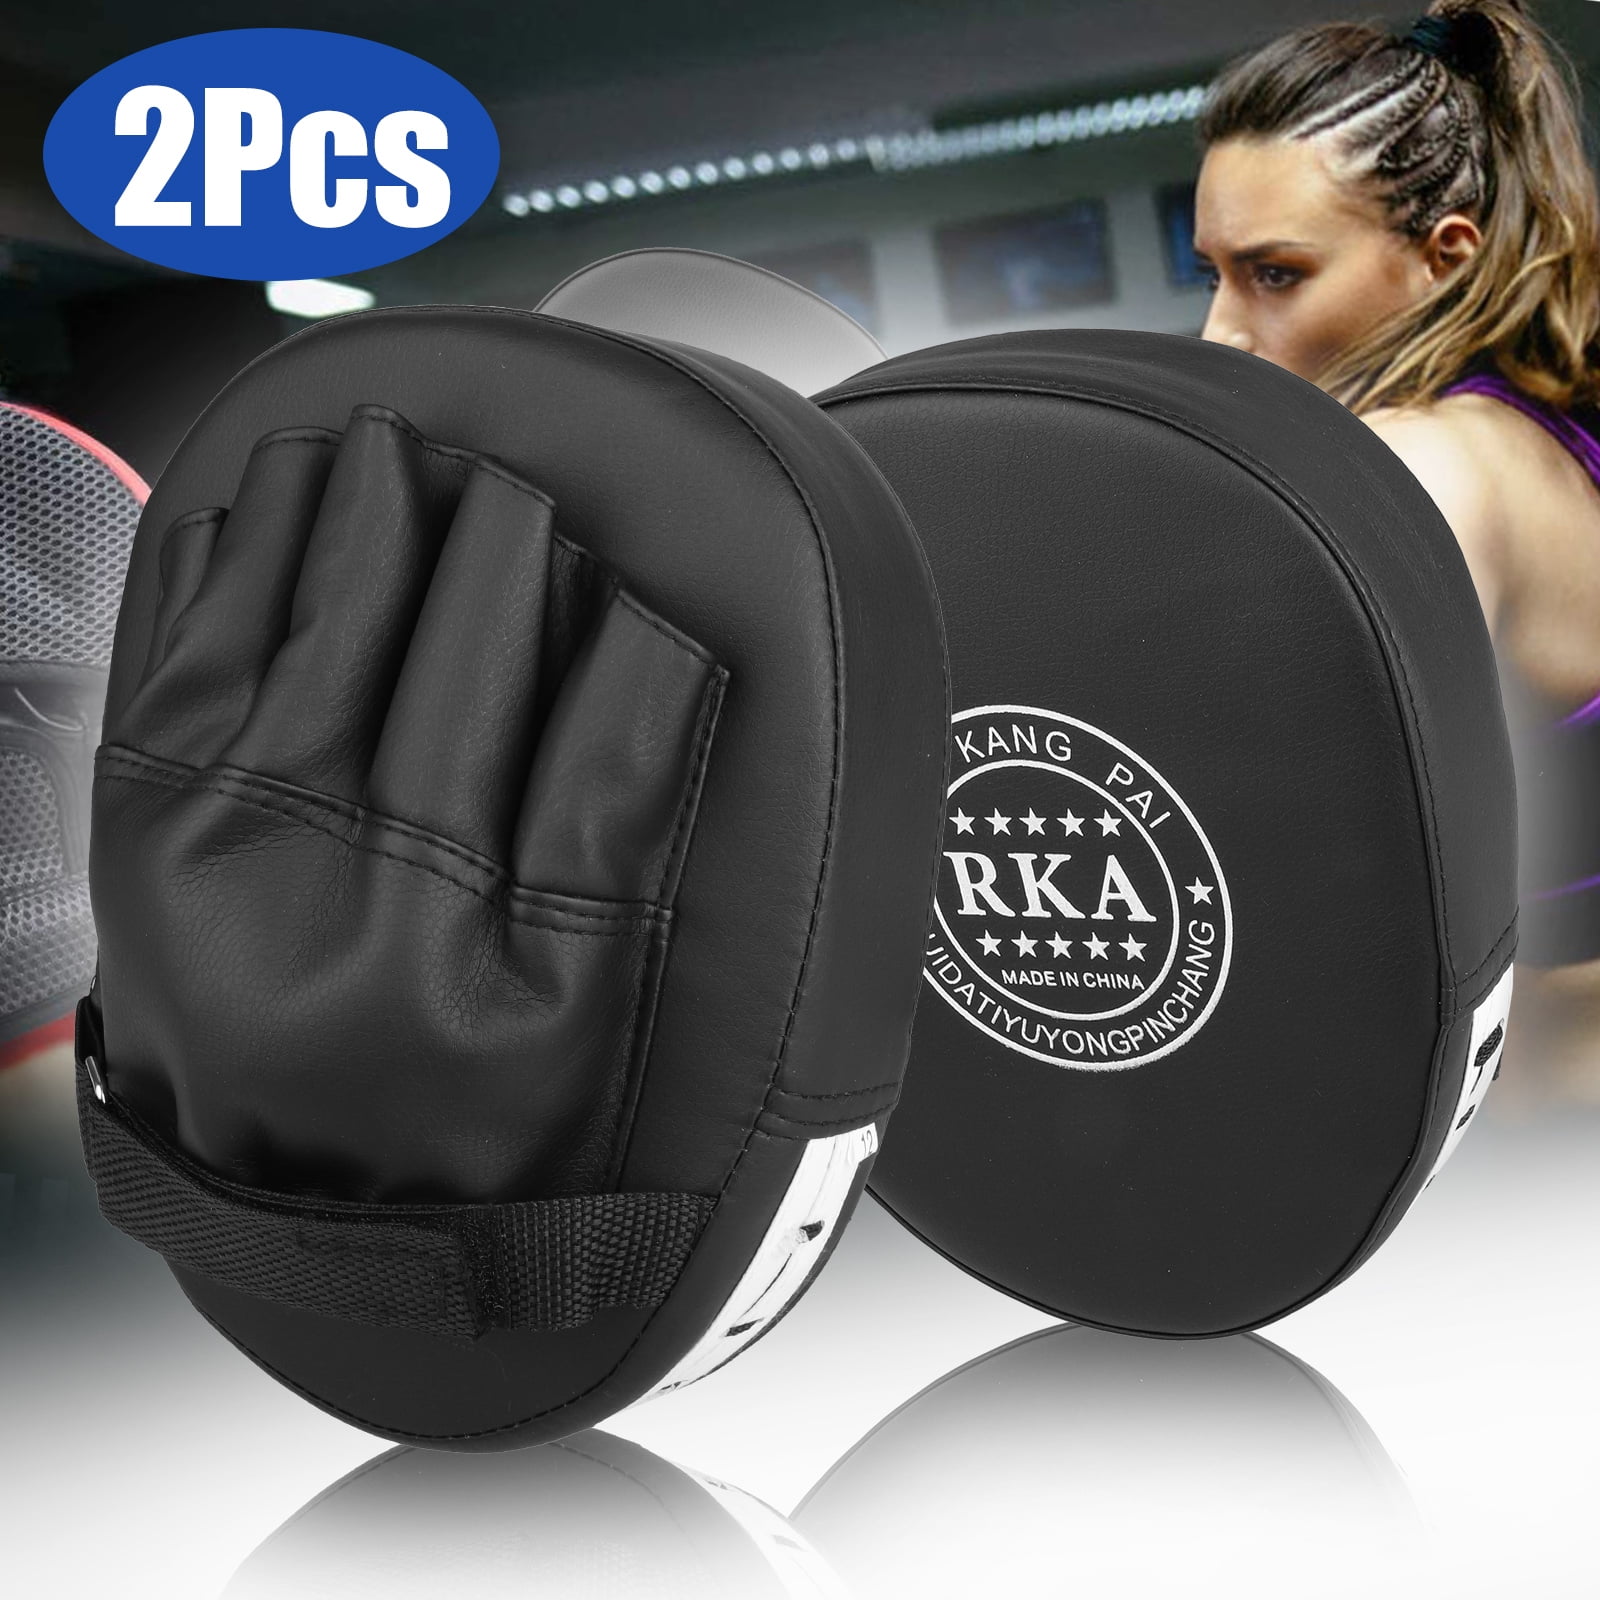 MMA Focus Boxing Pads Kick Martial Arts Foot Target Leather Training Equipment 